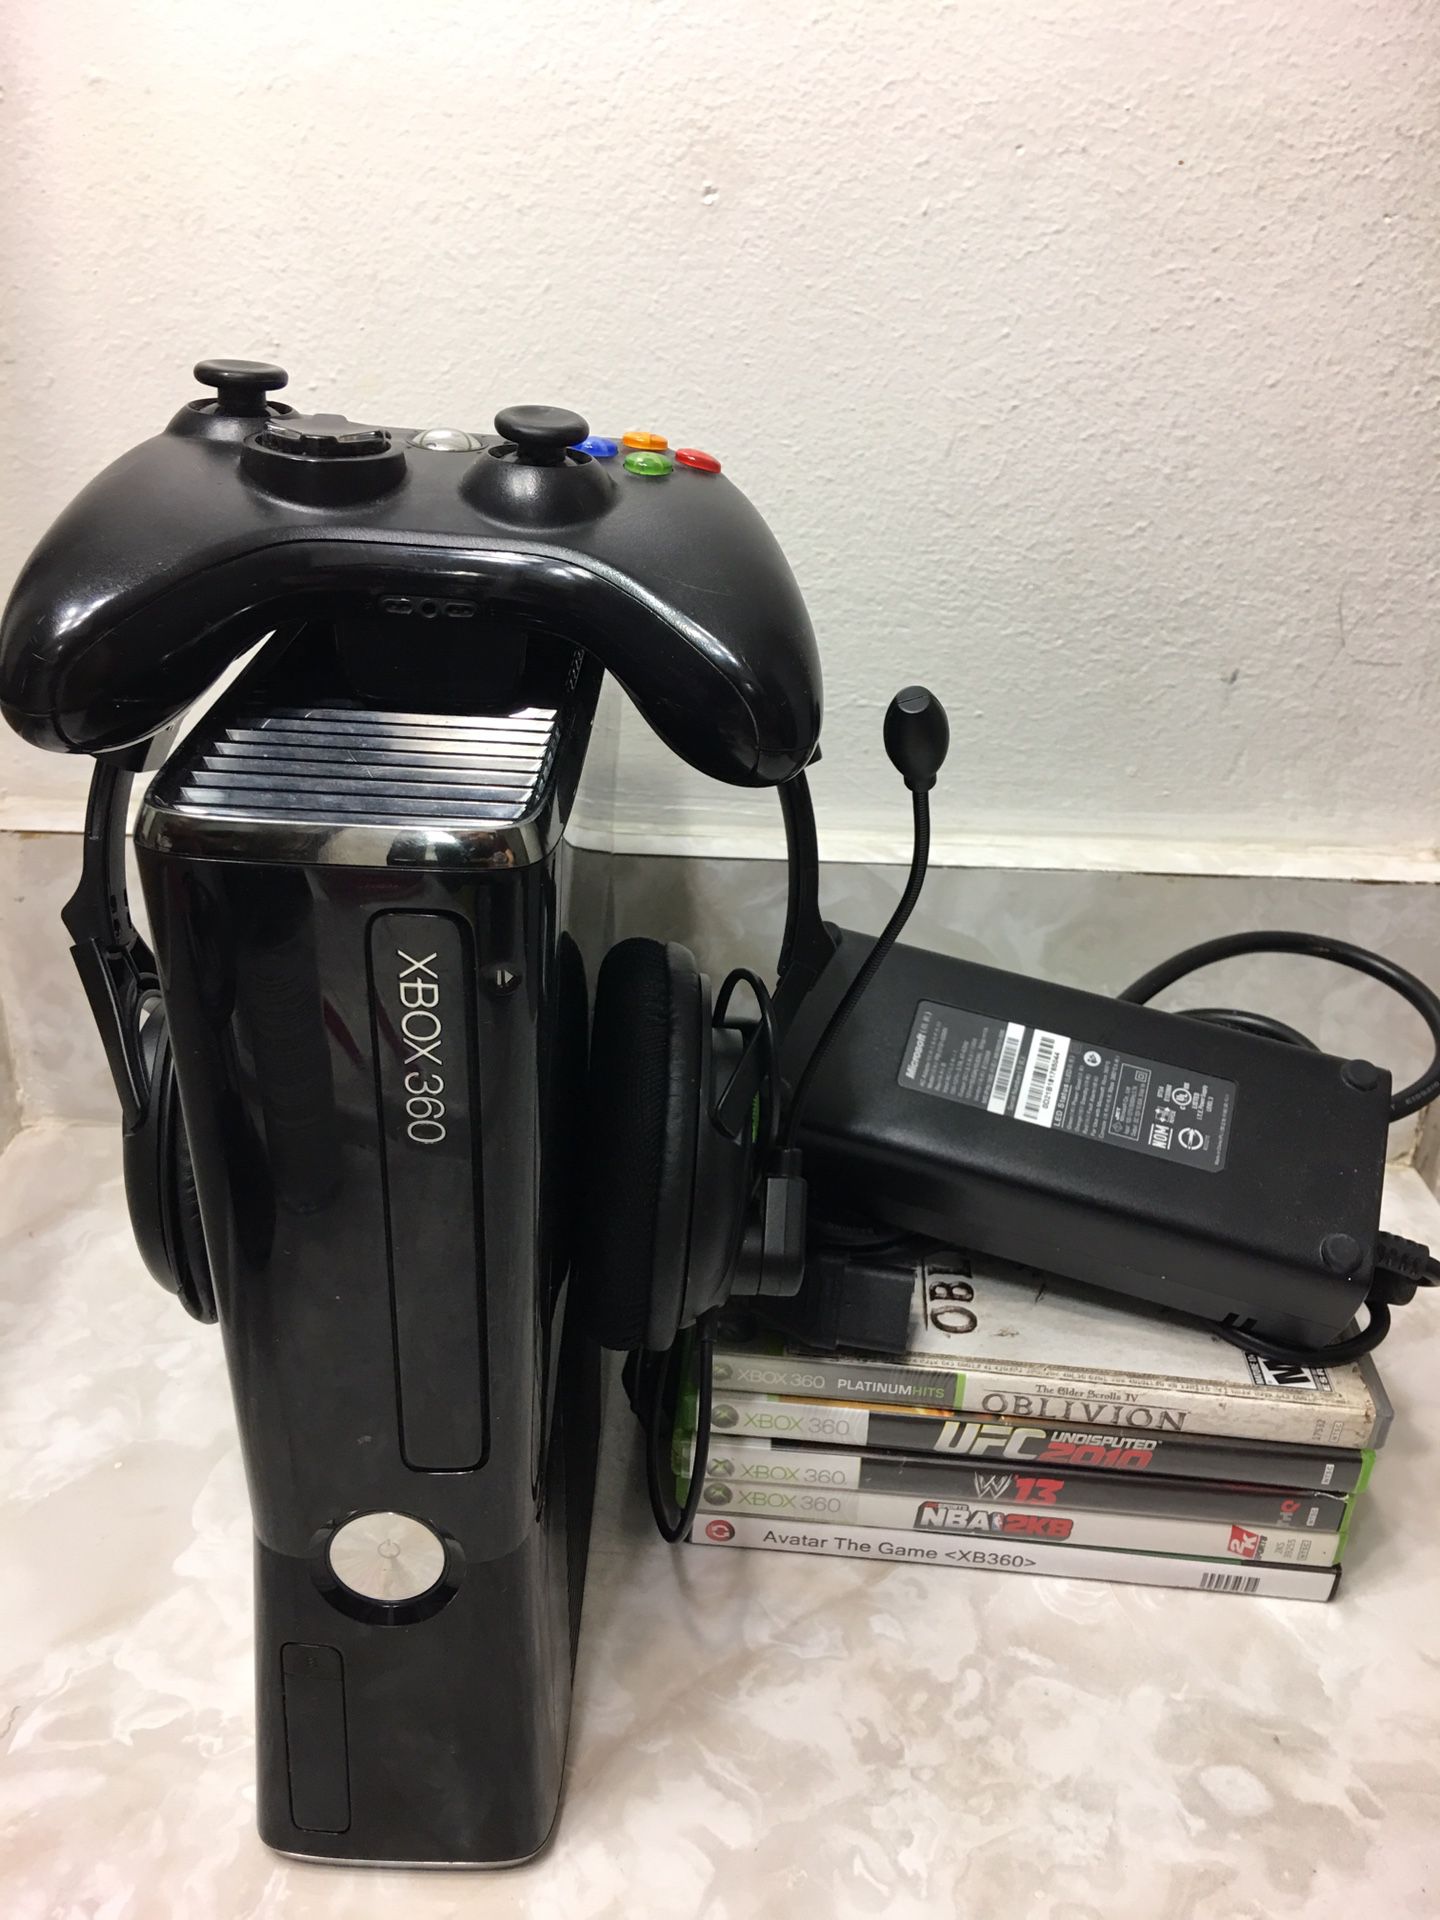 Xbox 360 S Console+Power cable+HDMI cable+controller+Headphone with mic+5 games